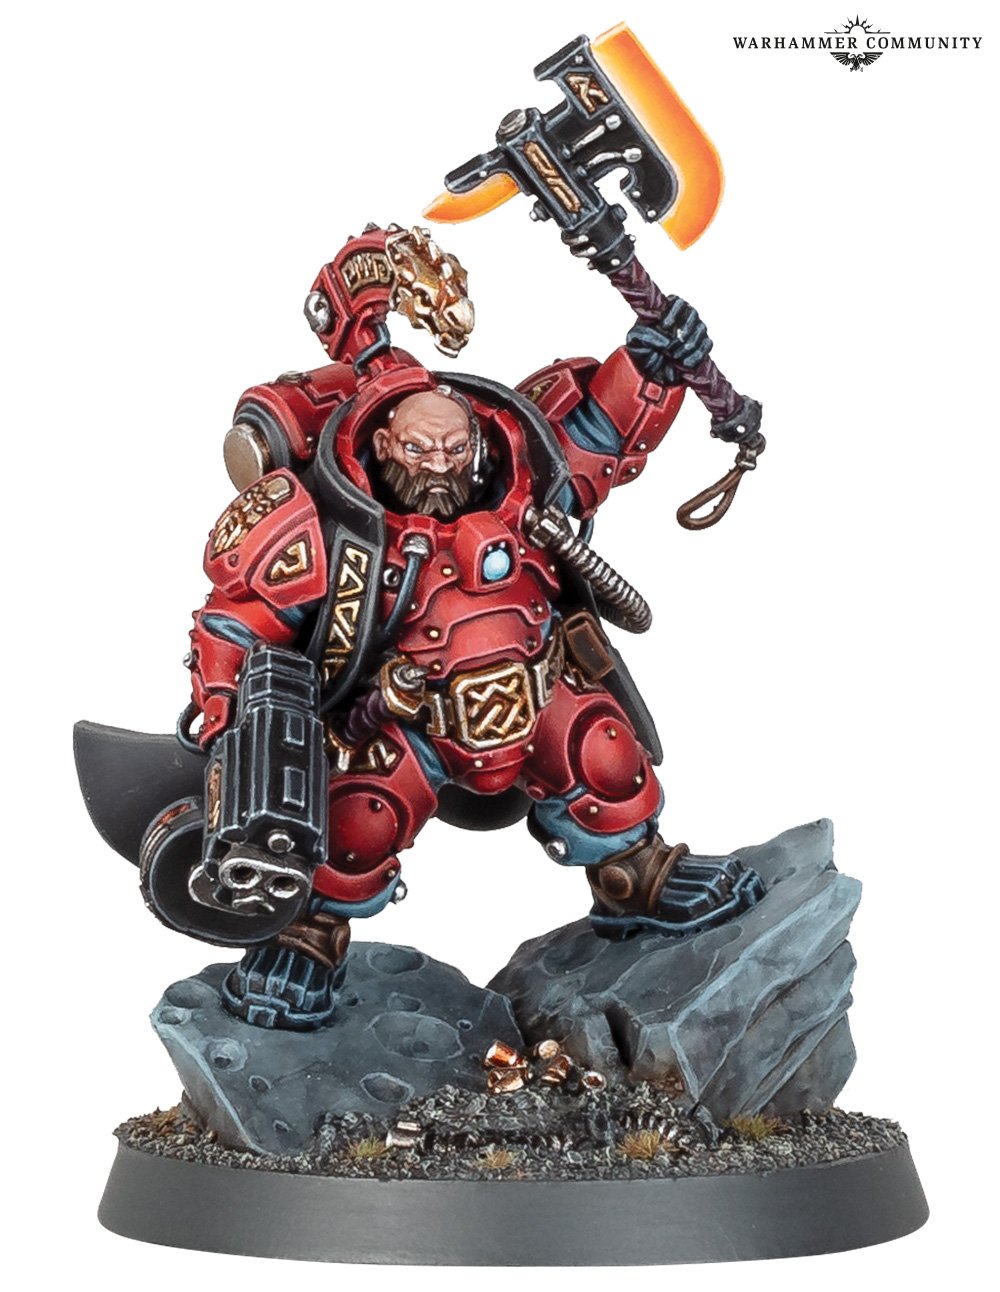 Warhammer 40k Leagues of Votann guide - Games Workshop photo showing the Kahl model in Ymyr red armour